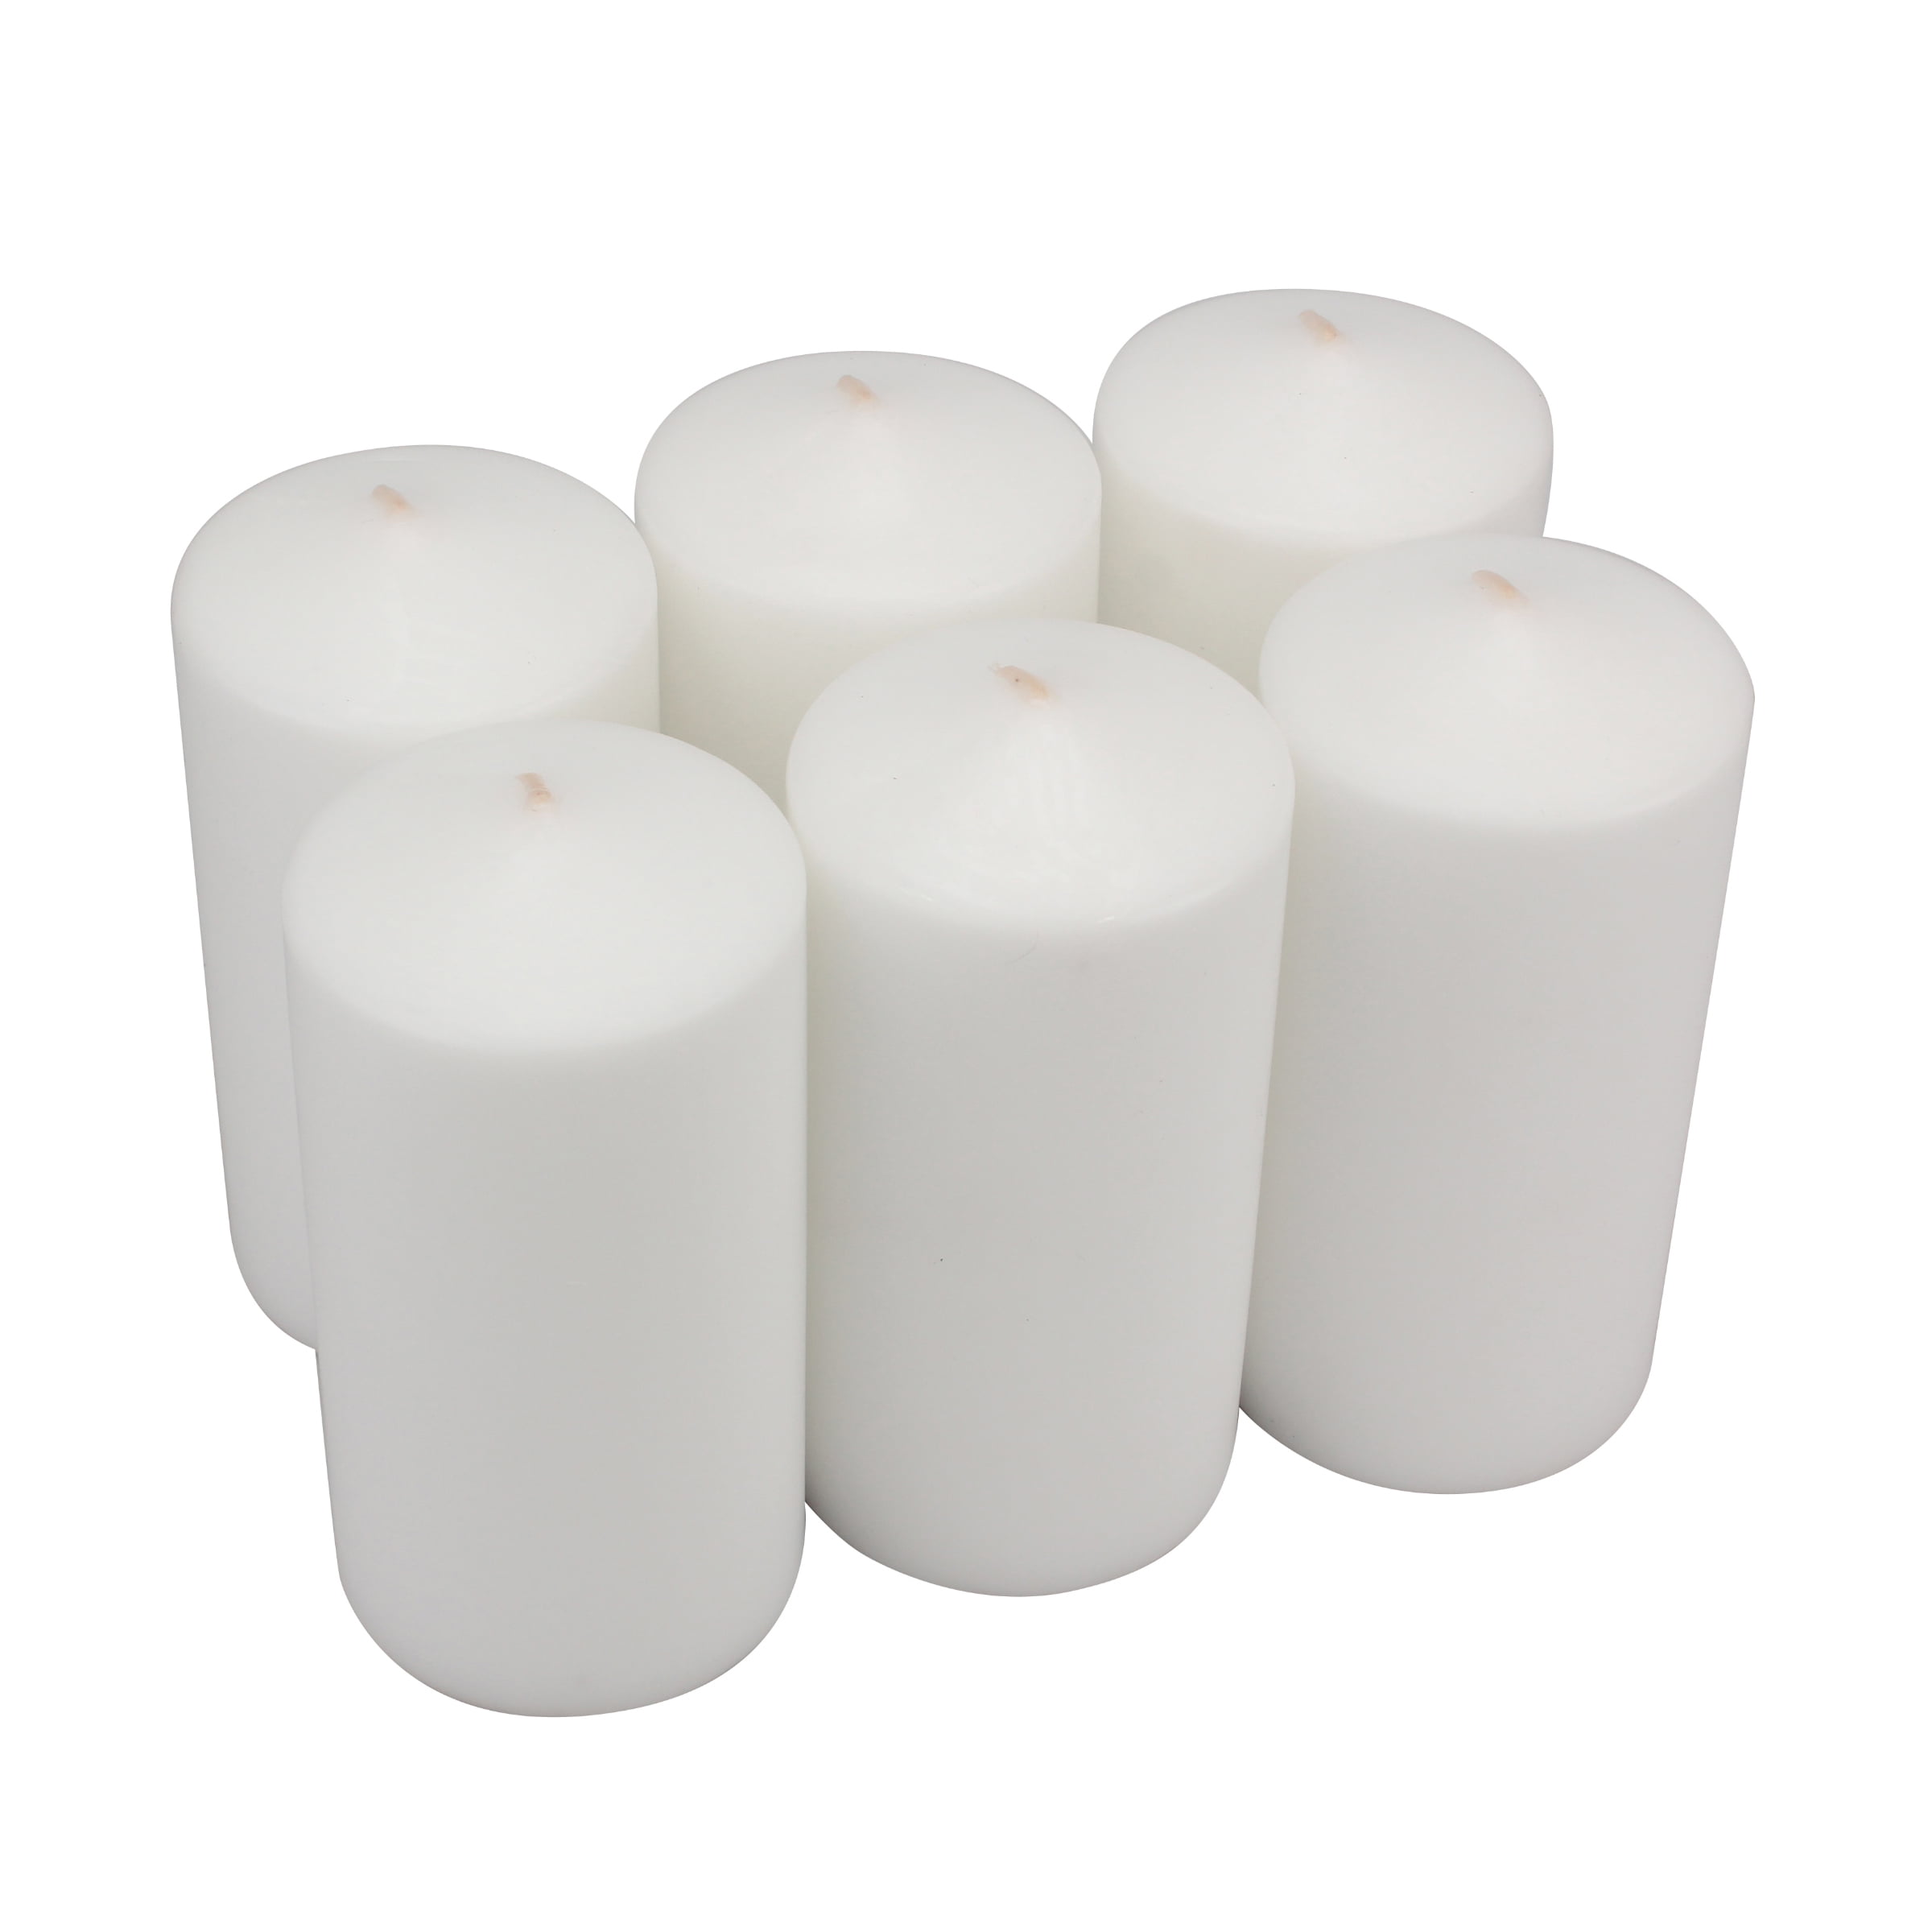 6 x 6 MONTGOMERY INDUSTRIES White Unscented Pillar Candle 3 Wick